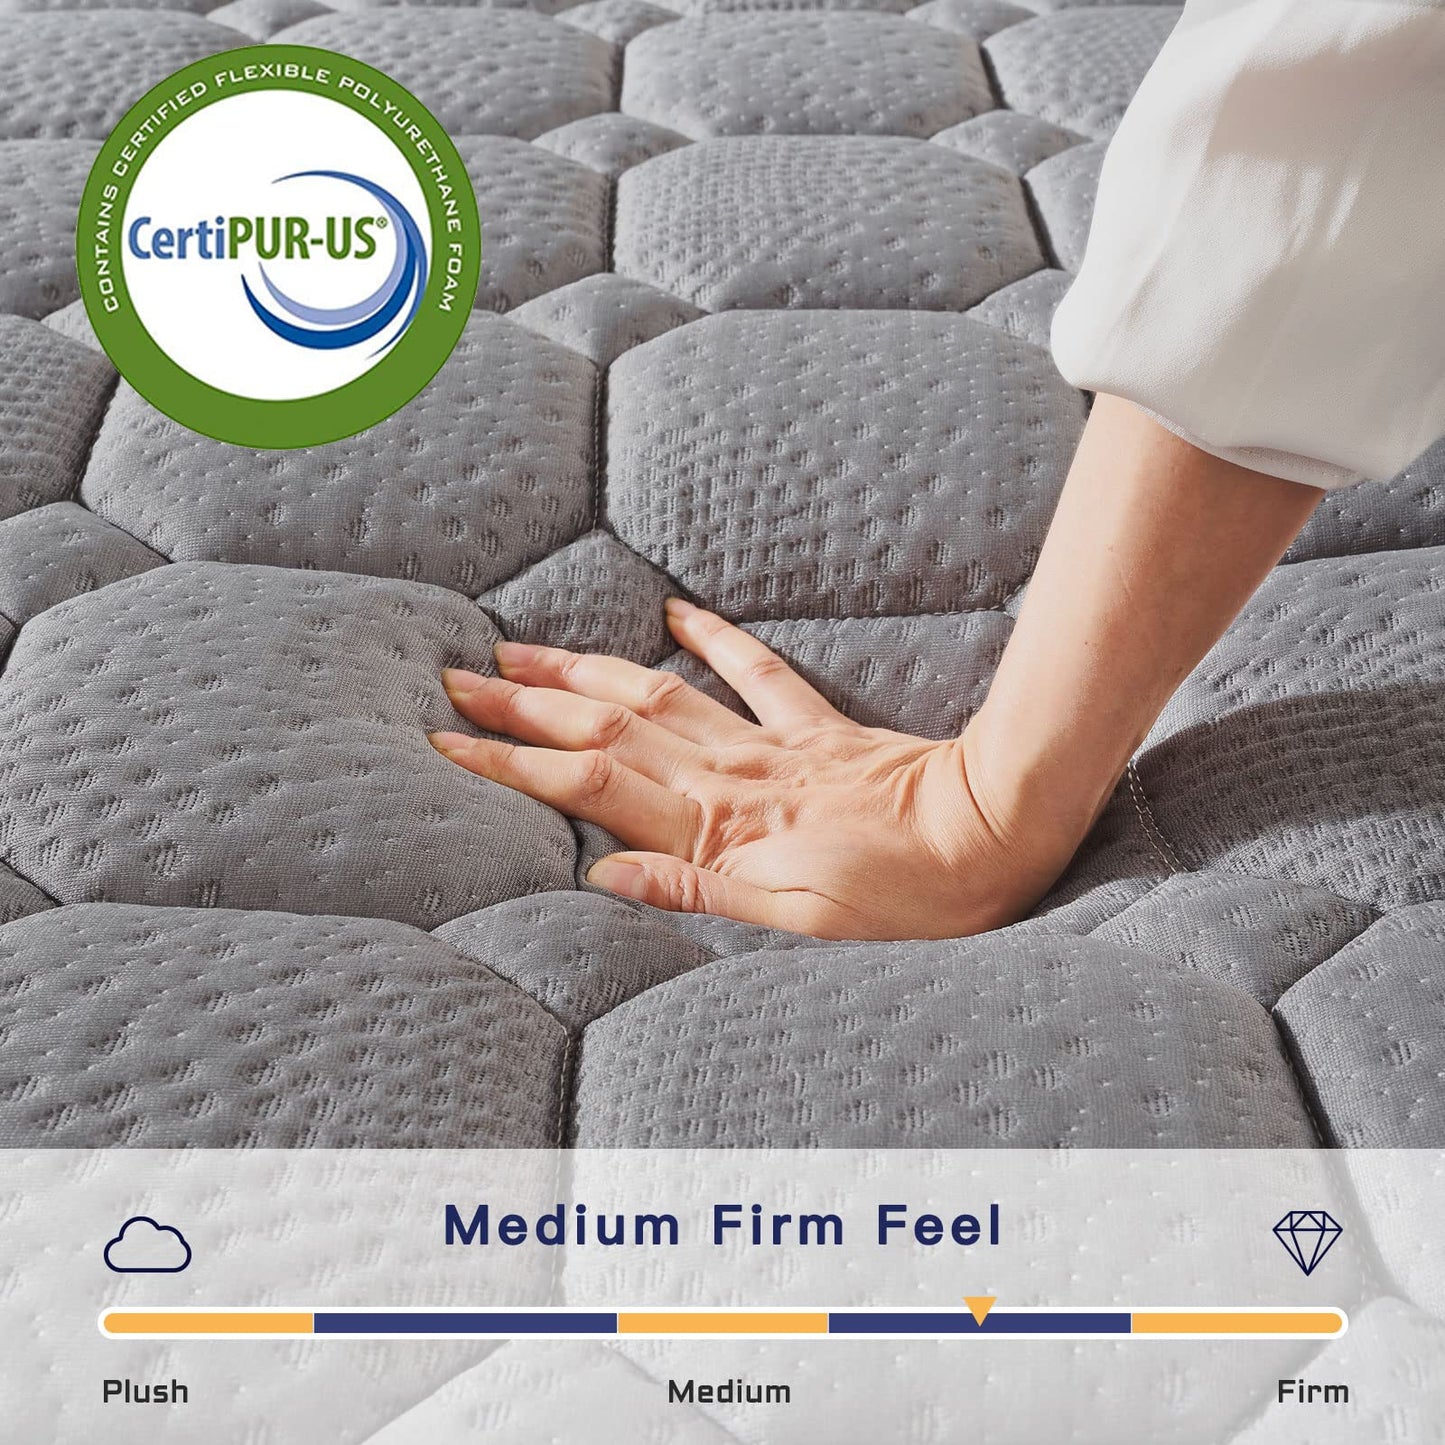 Vesgantti 10 Inch Twin XL Multilayer Hybrid Mattress - Multiple Sizes & Styles Available, Ergonomic Design with Memory Foam and Pocket Spring, Medium Firm Feel, Grey